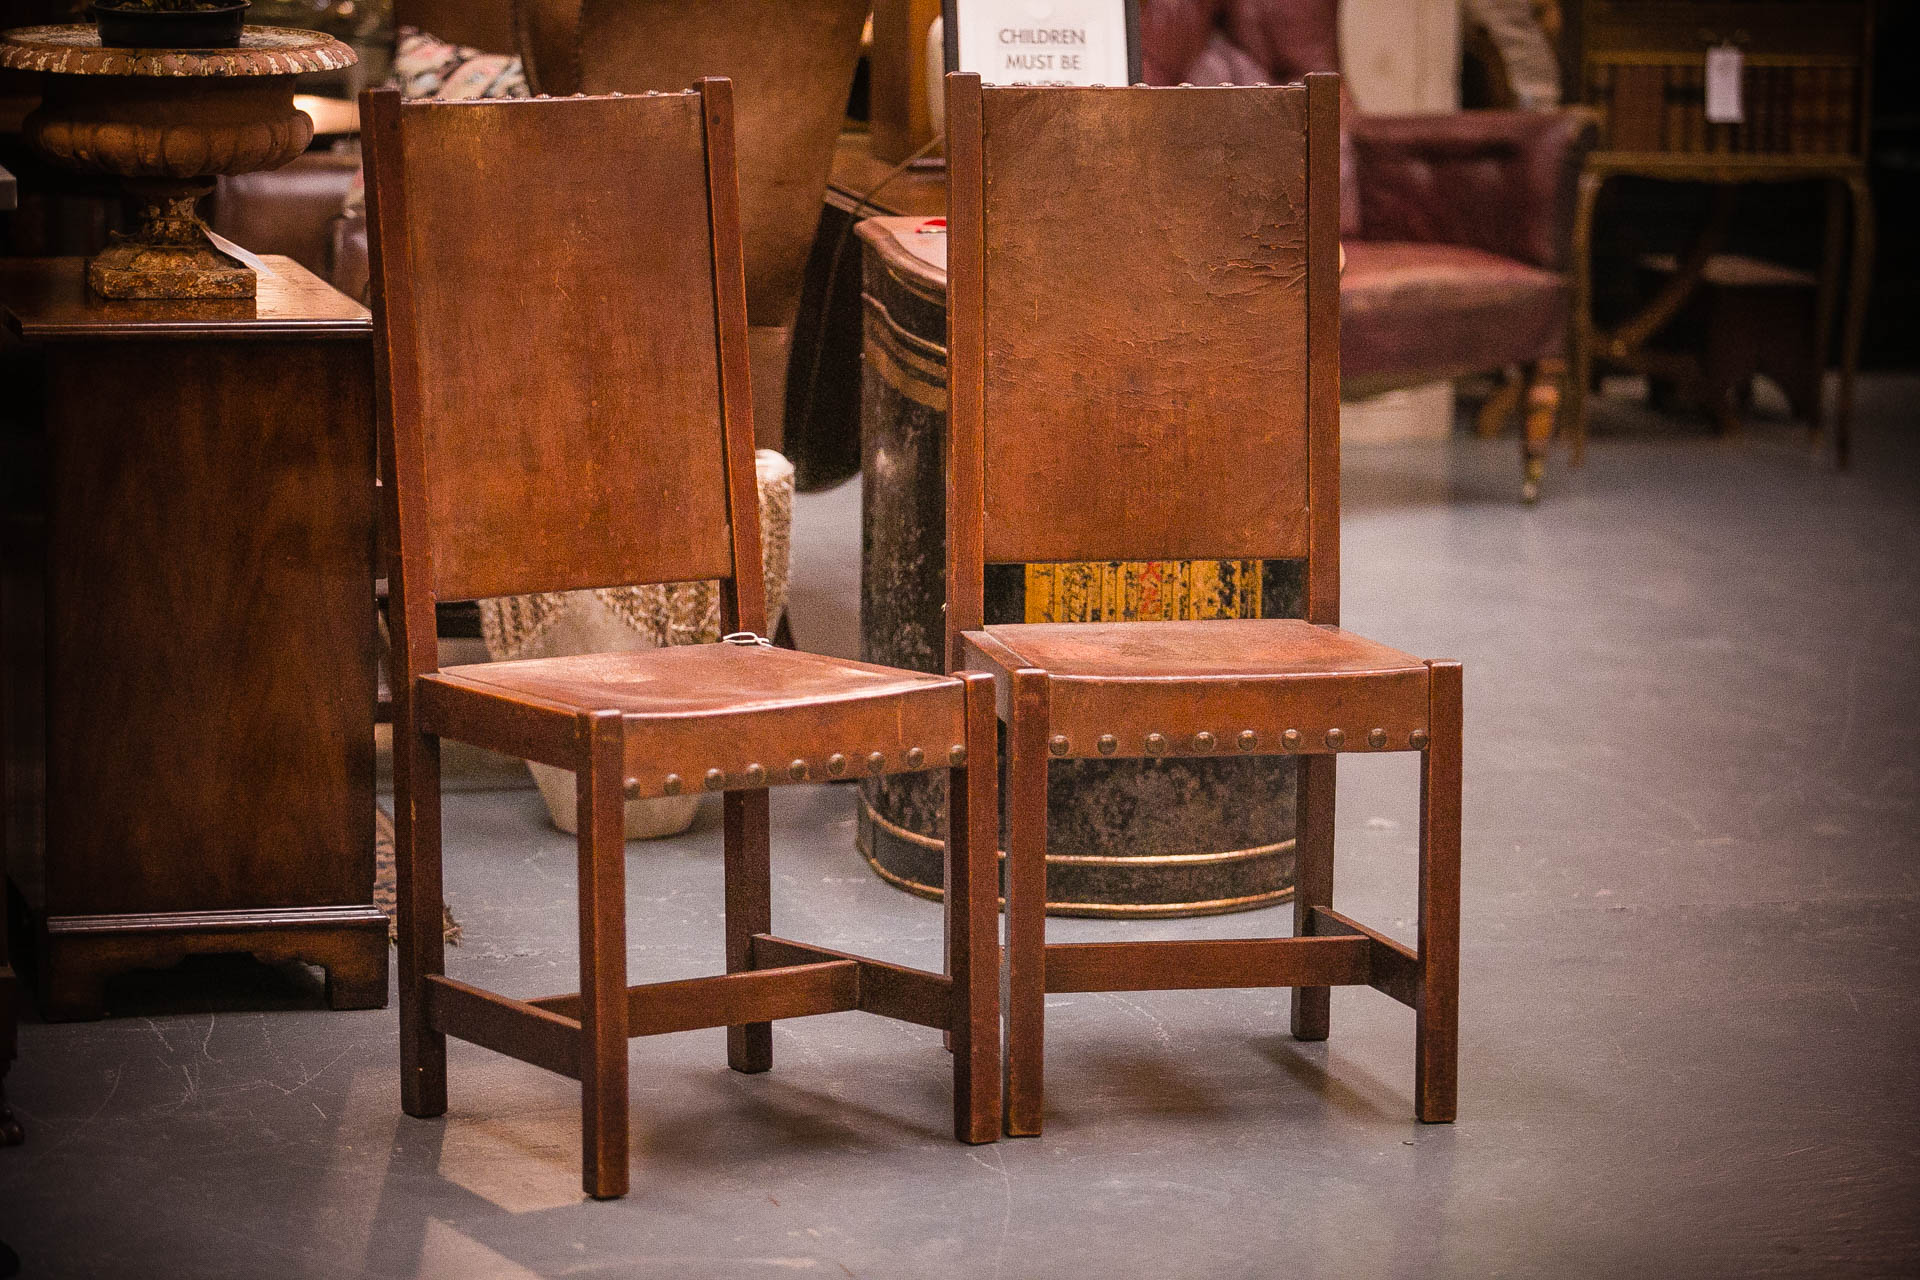 Pair Of Stickley Chairs The Store Yard